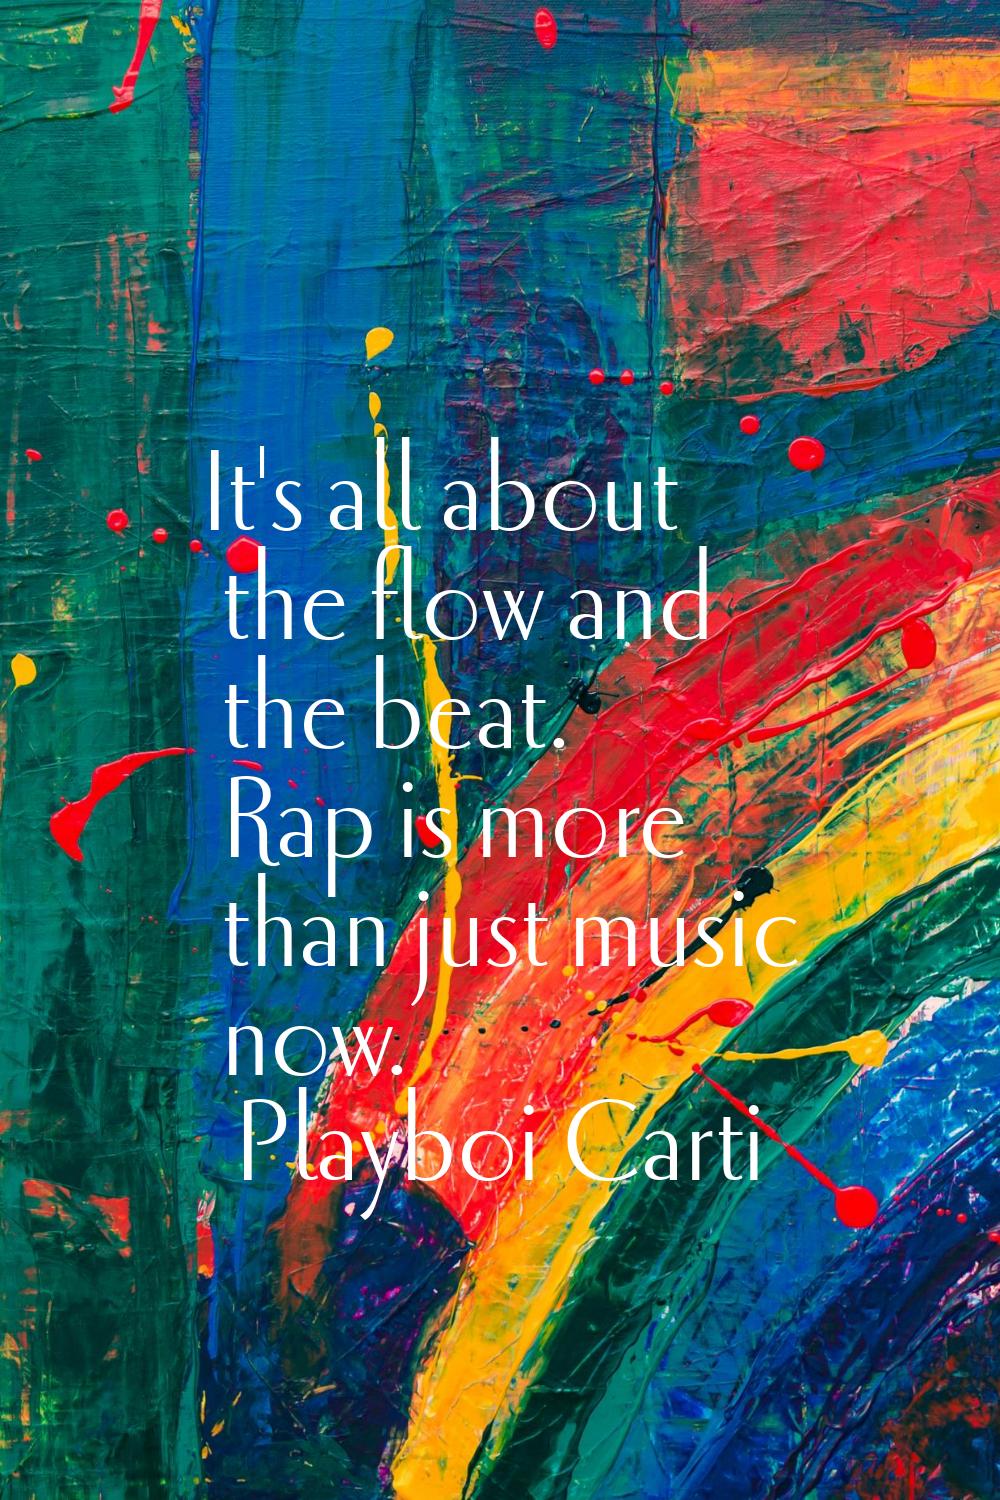 It's all about the flow and the beat. Rap is more than just music now.